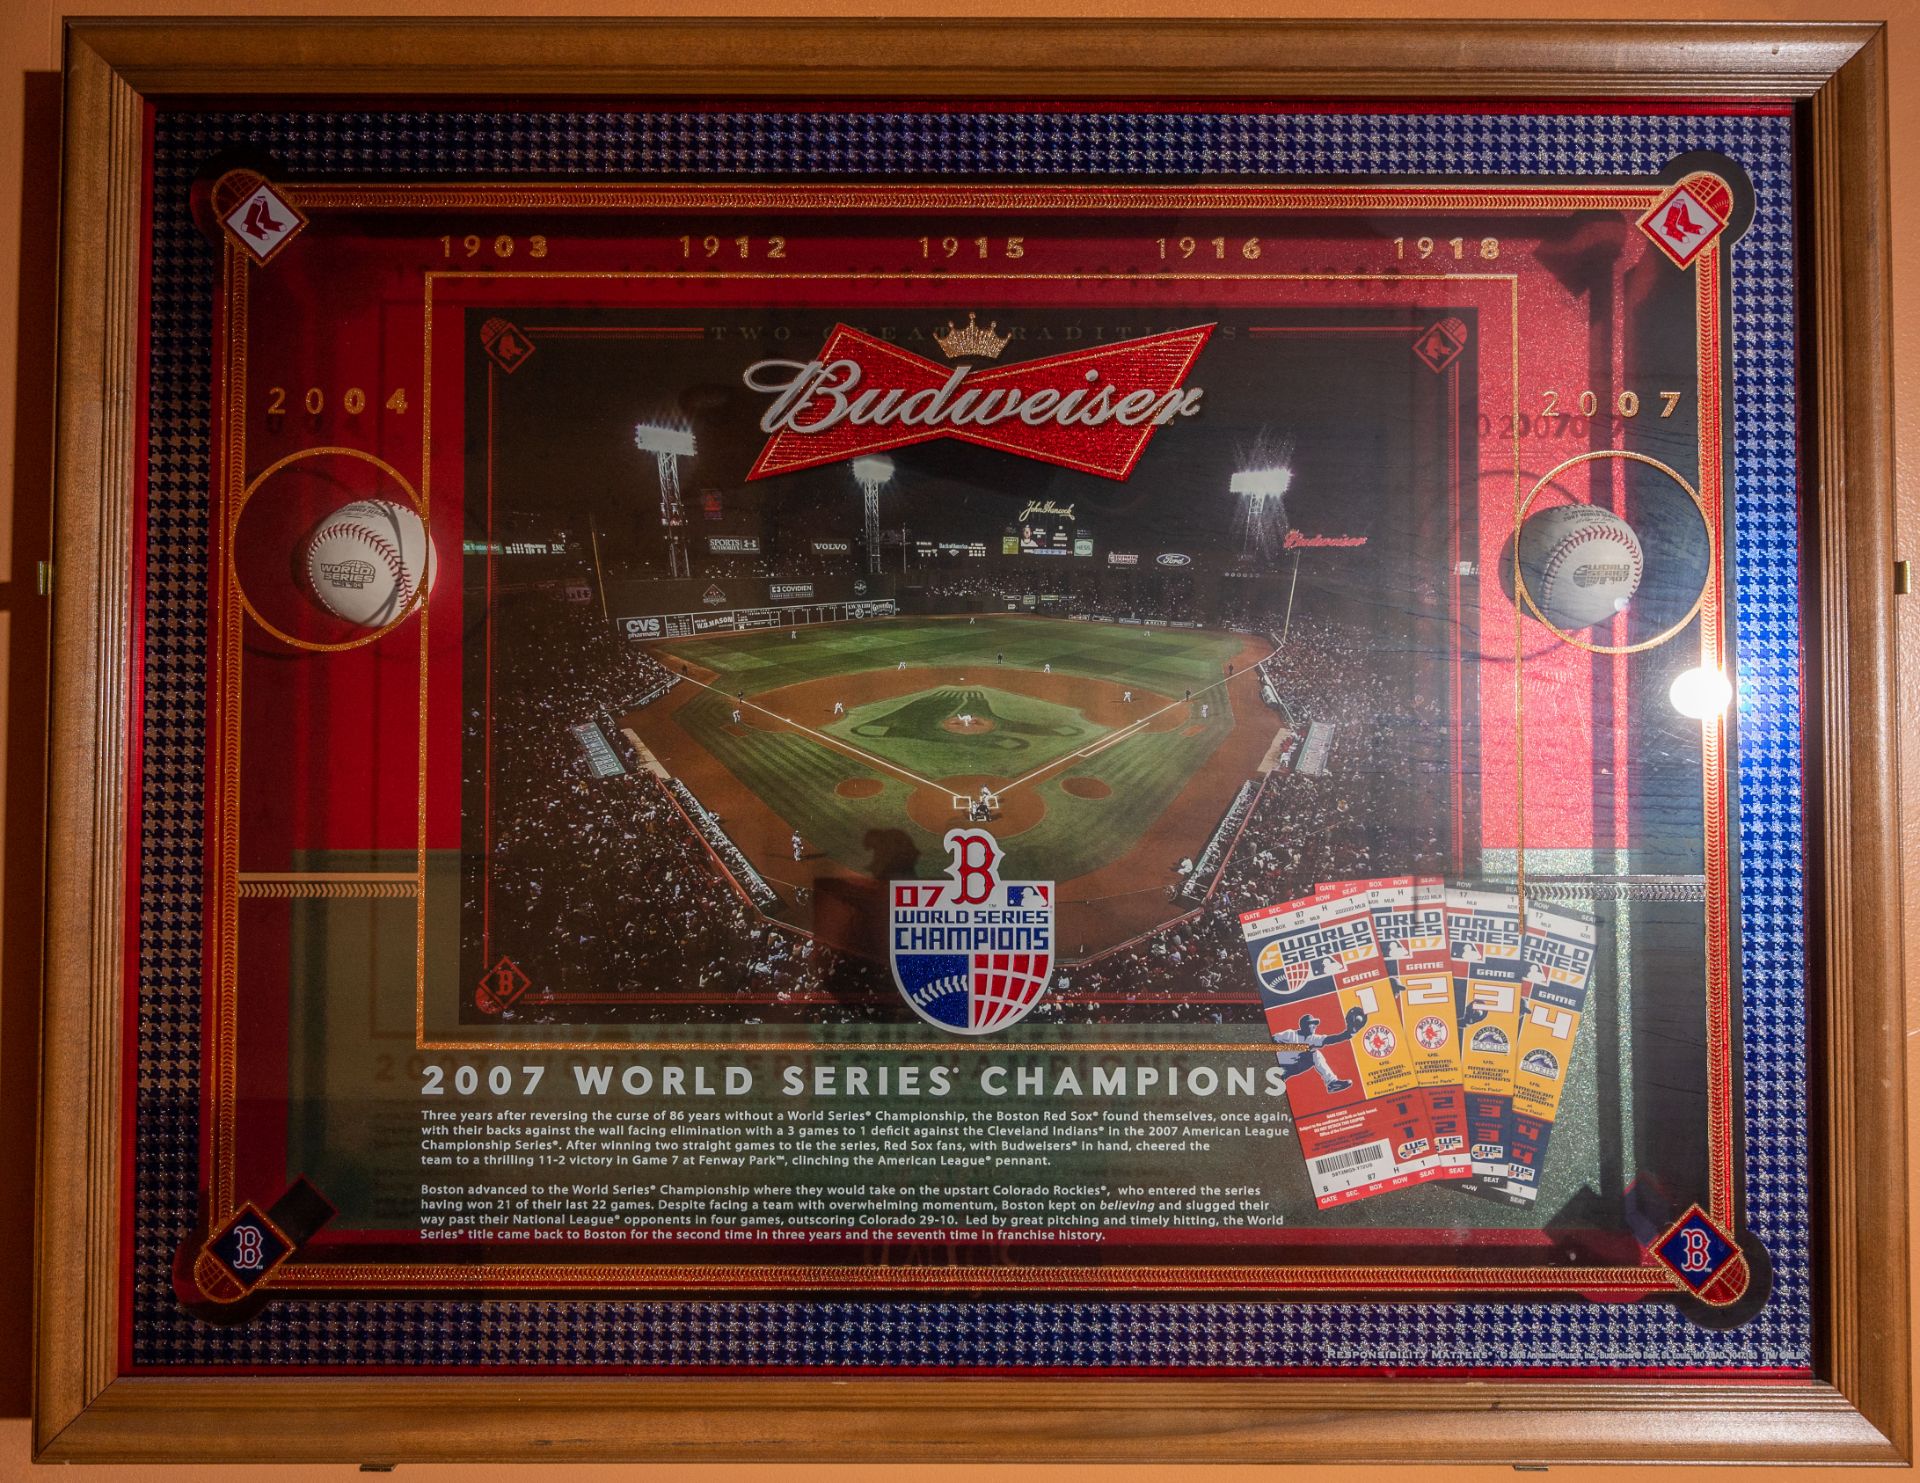 Red Sox Budweiser 2004 and 2007 World Series Shadow Box w/ Baseball and Ticket Stubs 40"x31"x2.5"